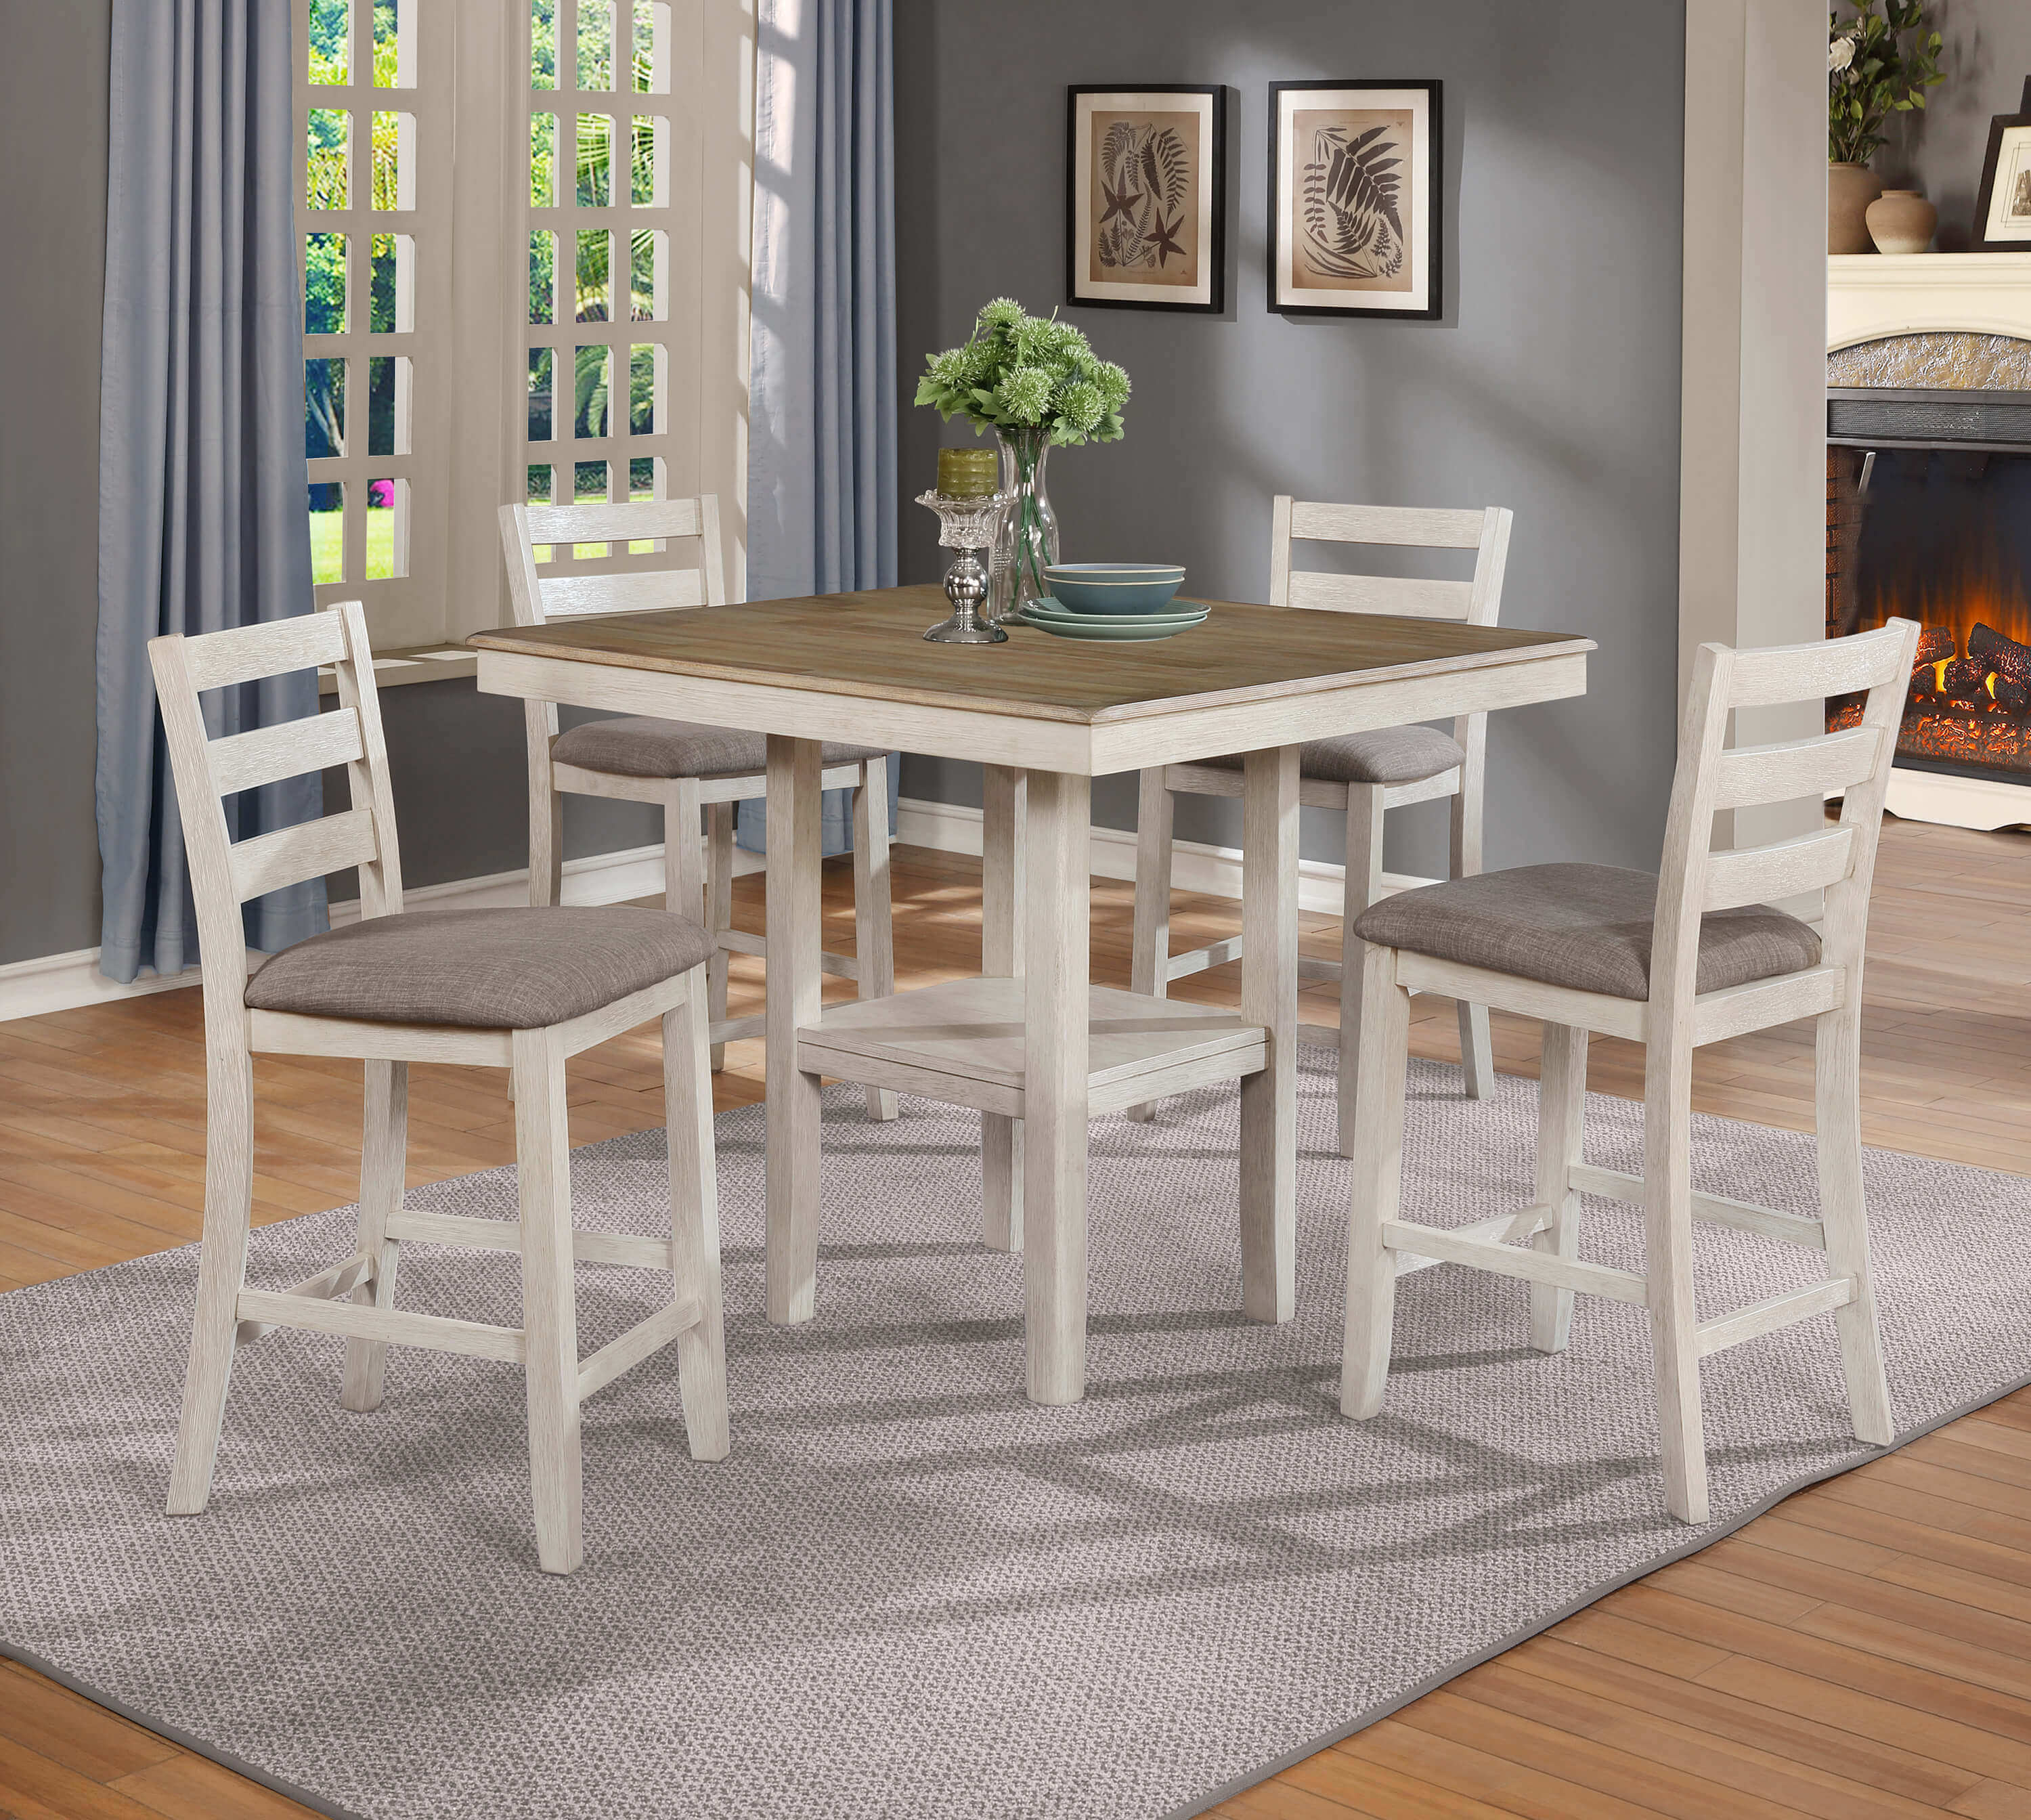 Tahoe White Counter Height Set | Dining Room Furniture Sets High Dining Room Tables